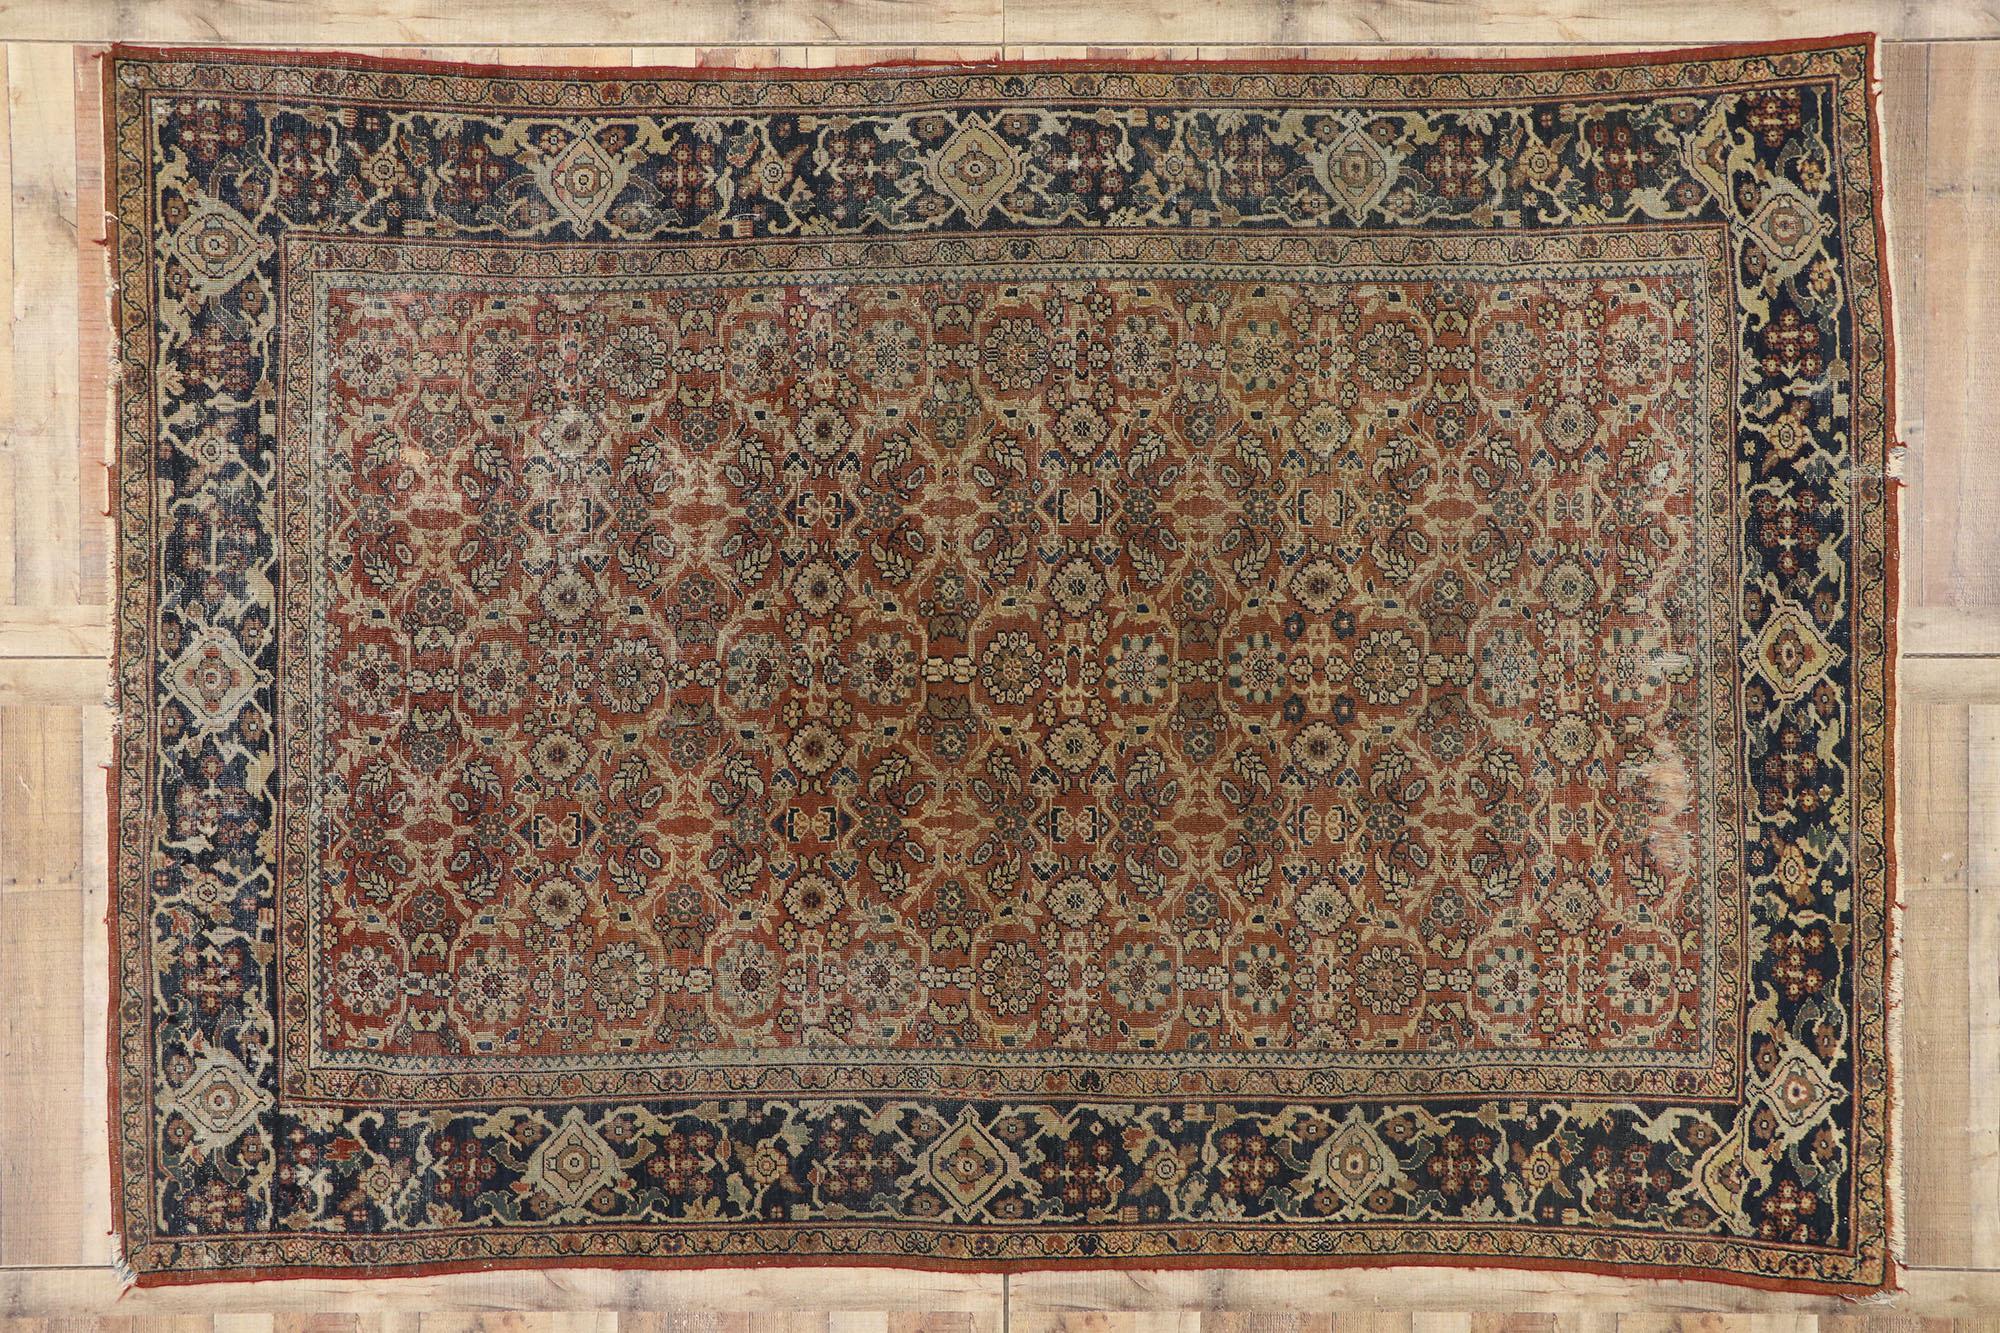 77572 distressed antique Persian Mahal rug with Modern Rustic English style 08'02 x 11'08. With its perfectly worn-in charm and rustic sensibility, this hand knotted wool distressed antique Persian Mahal rug will take on a curated lived-in look that